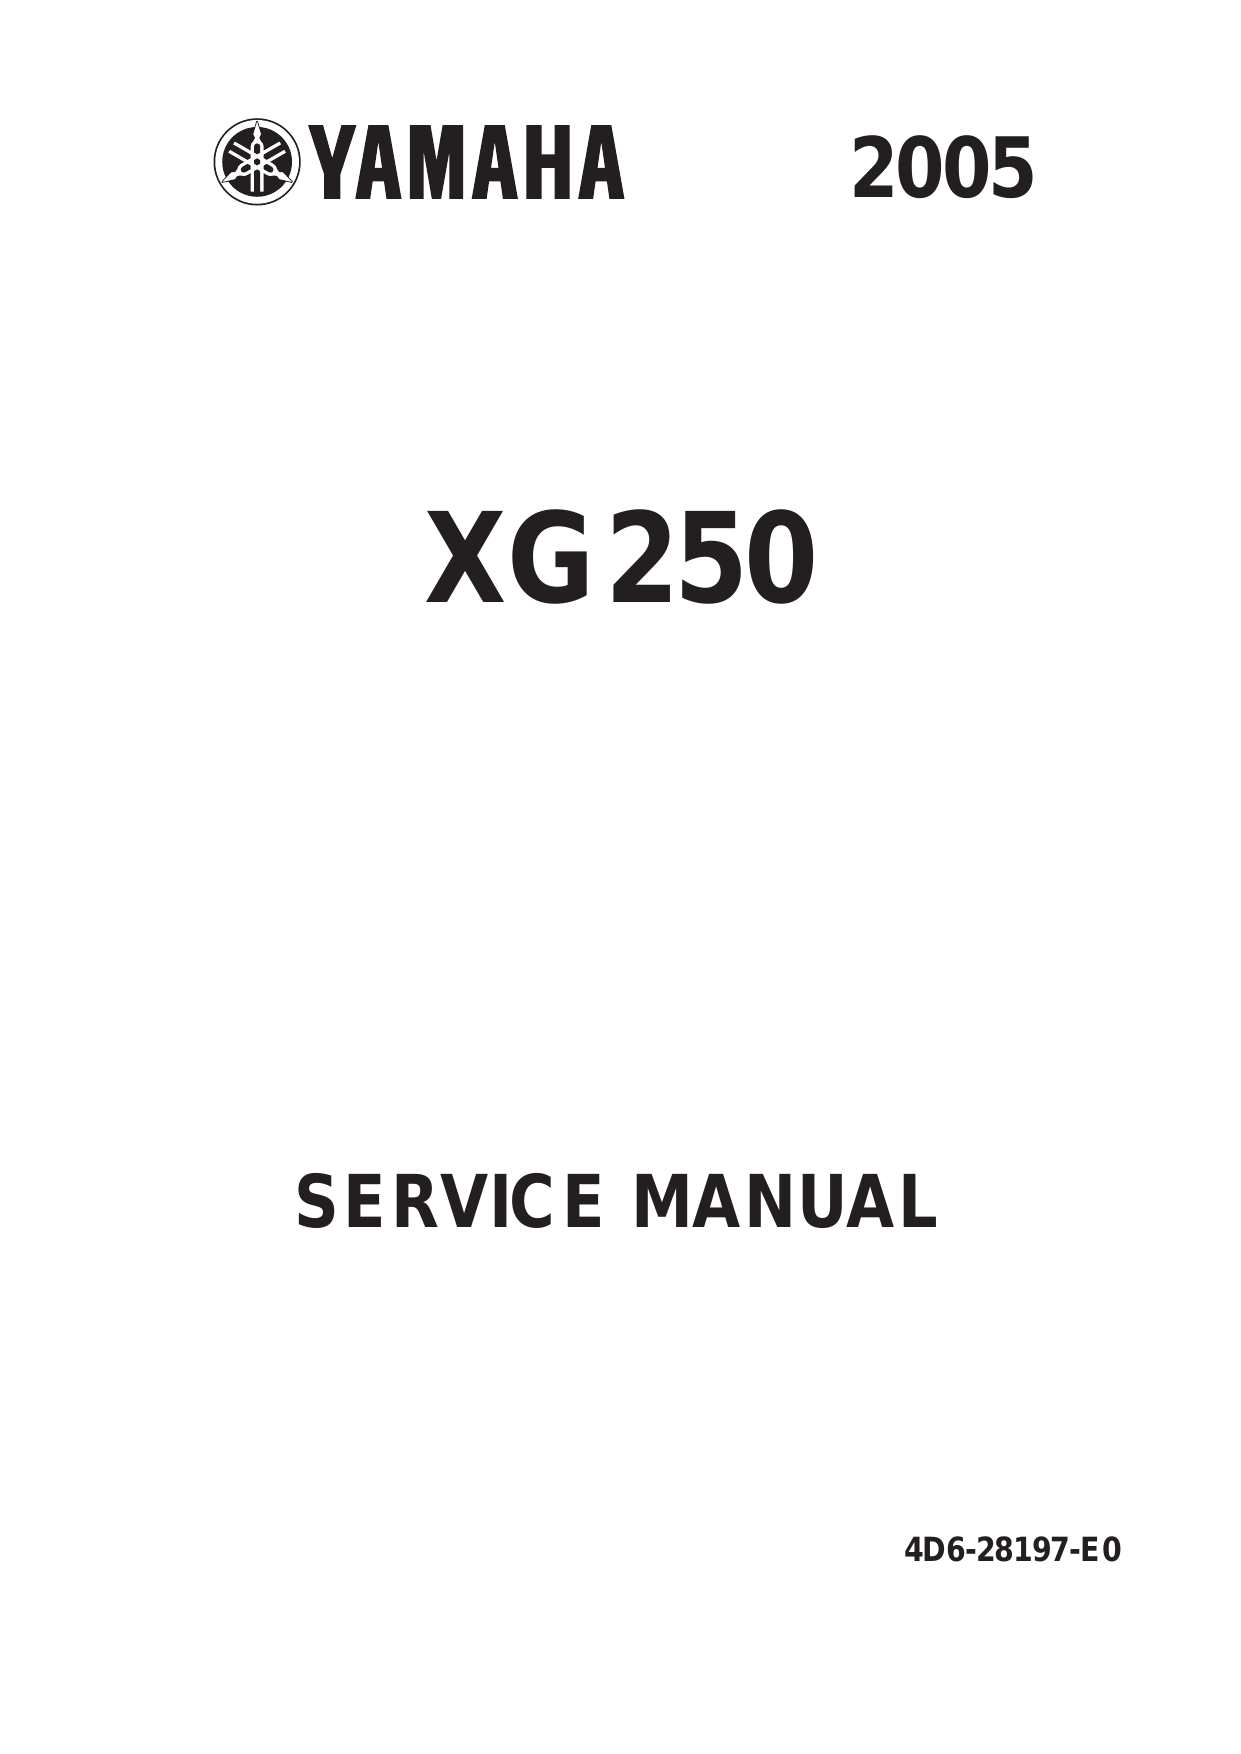 Yamaha XG250 Tricker lightweight motorcycle repair, service manual Preview image 6